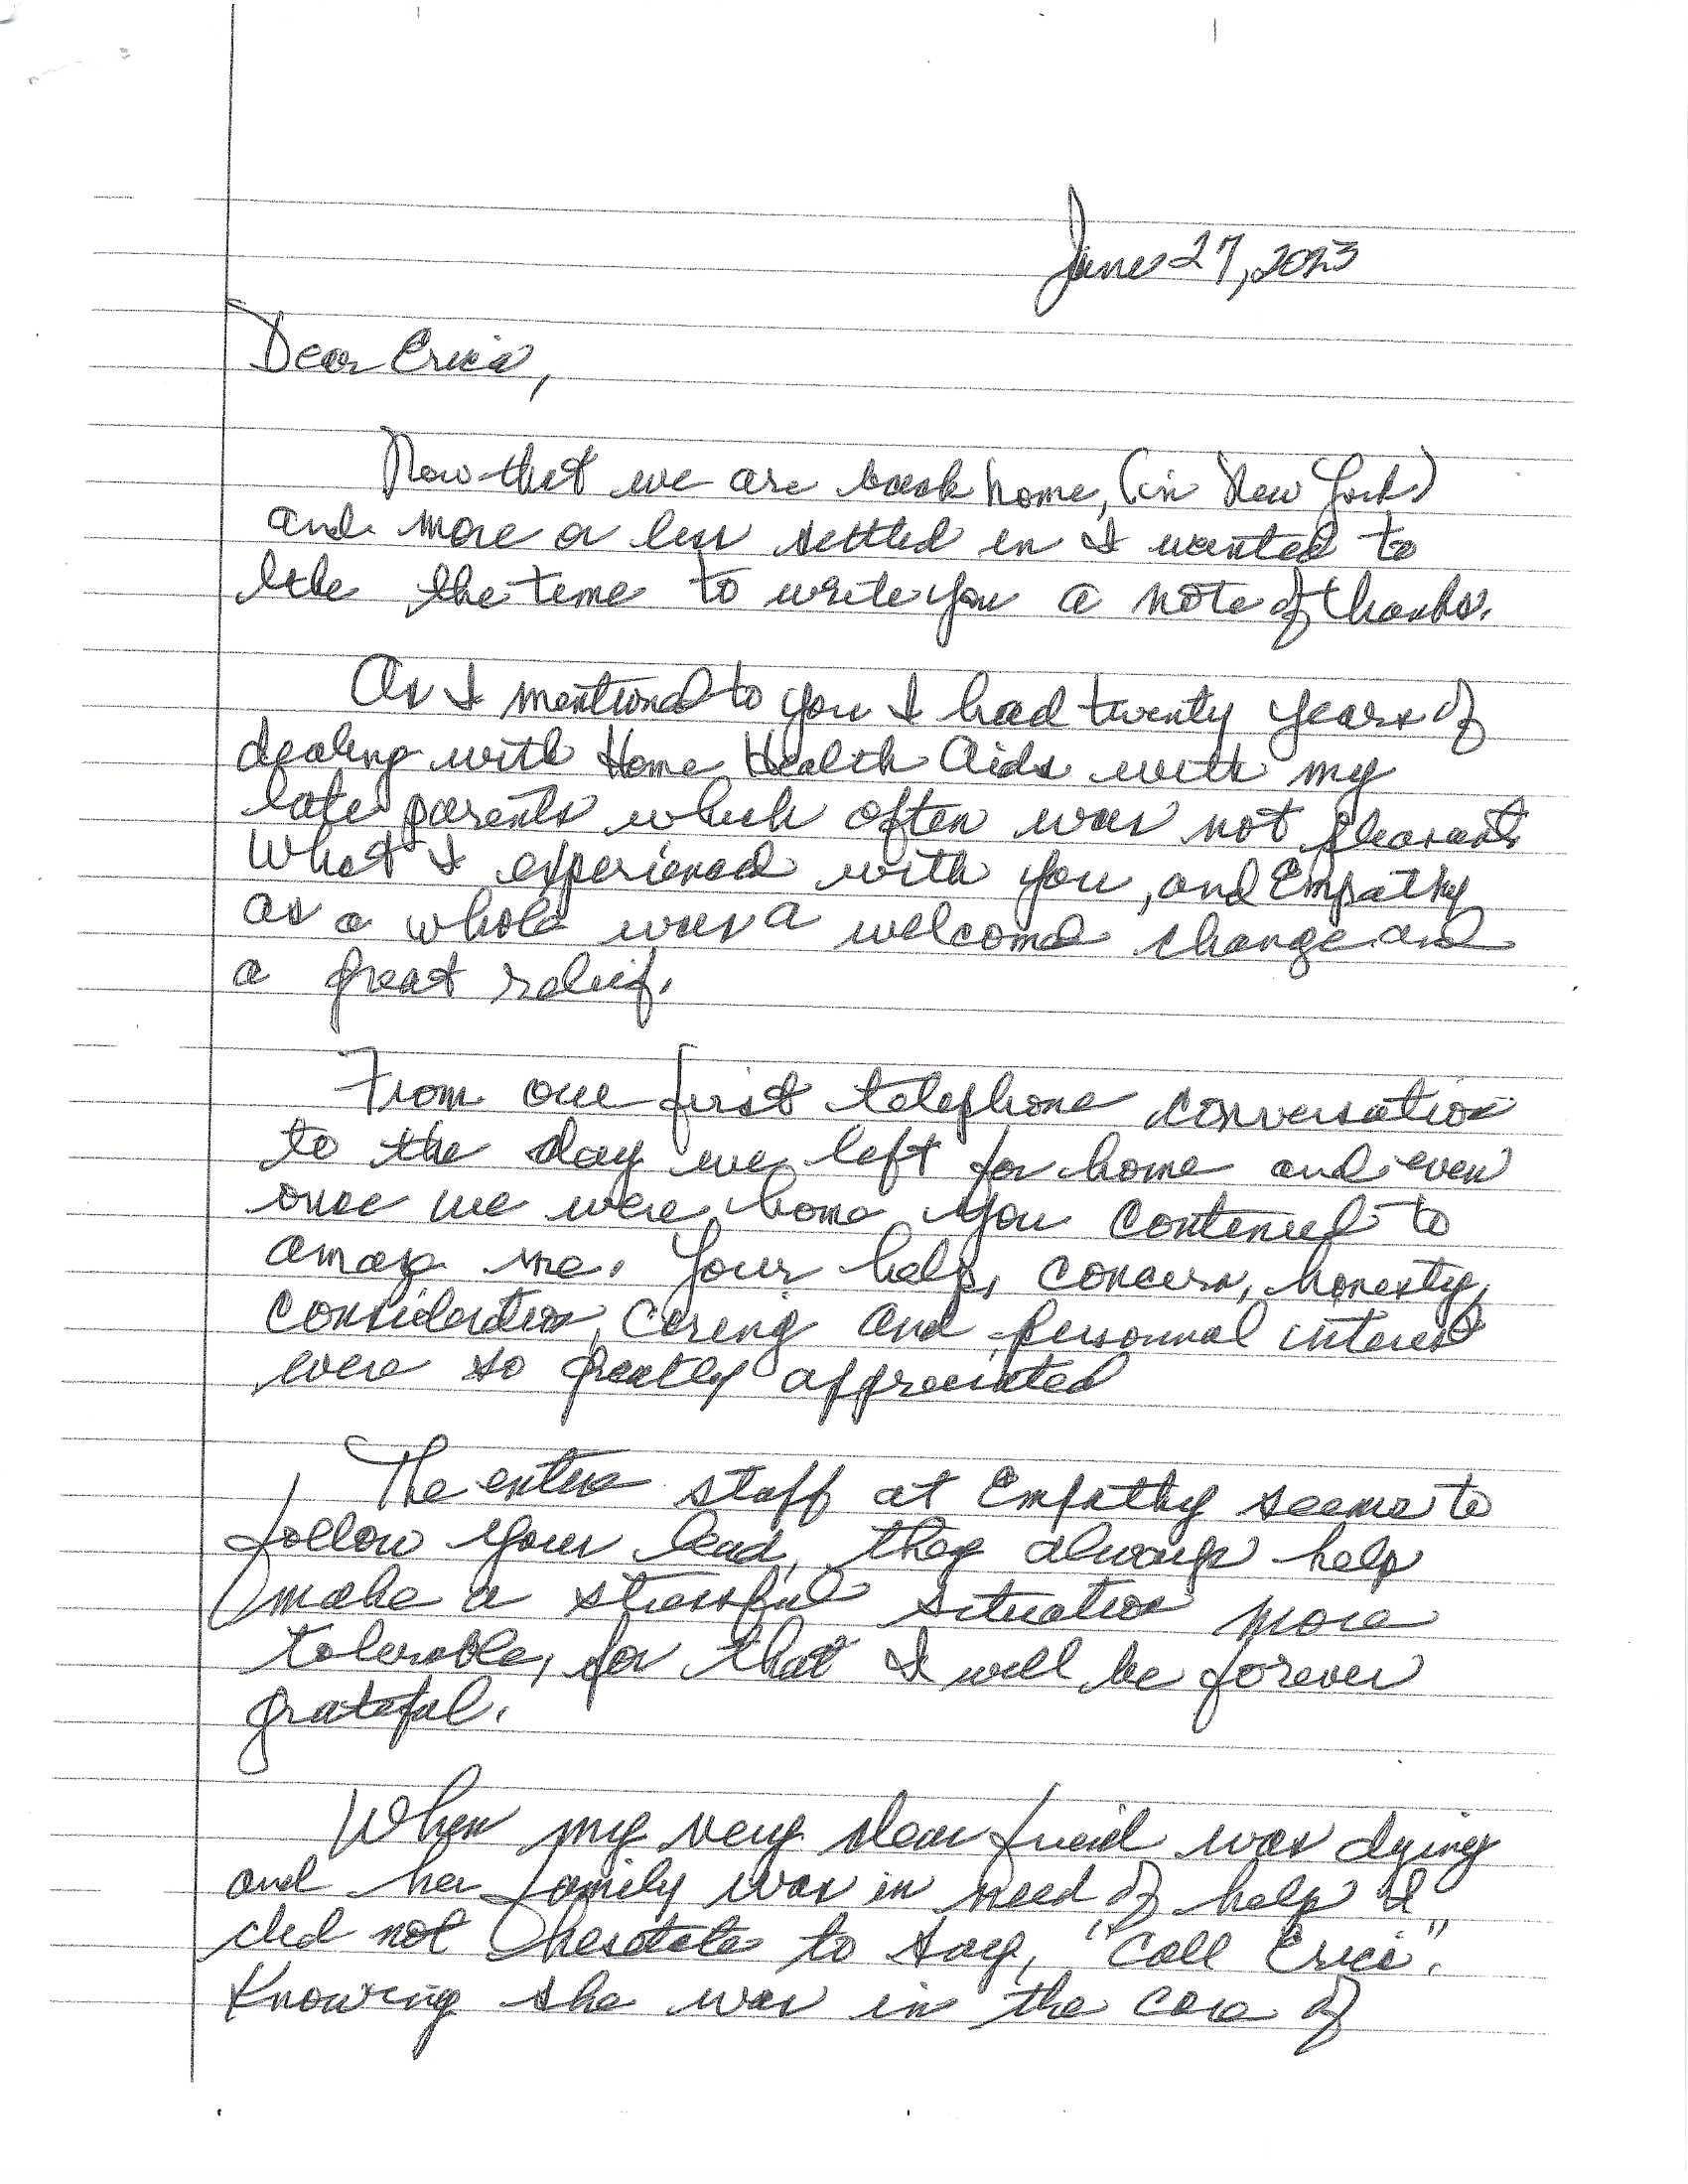 Letters of Recommendation - Empathy Care 2023 (1)_Page_06